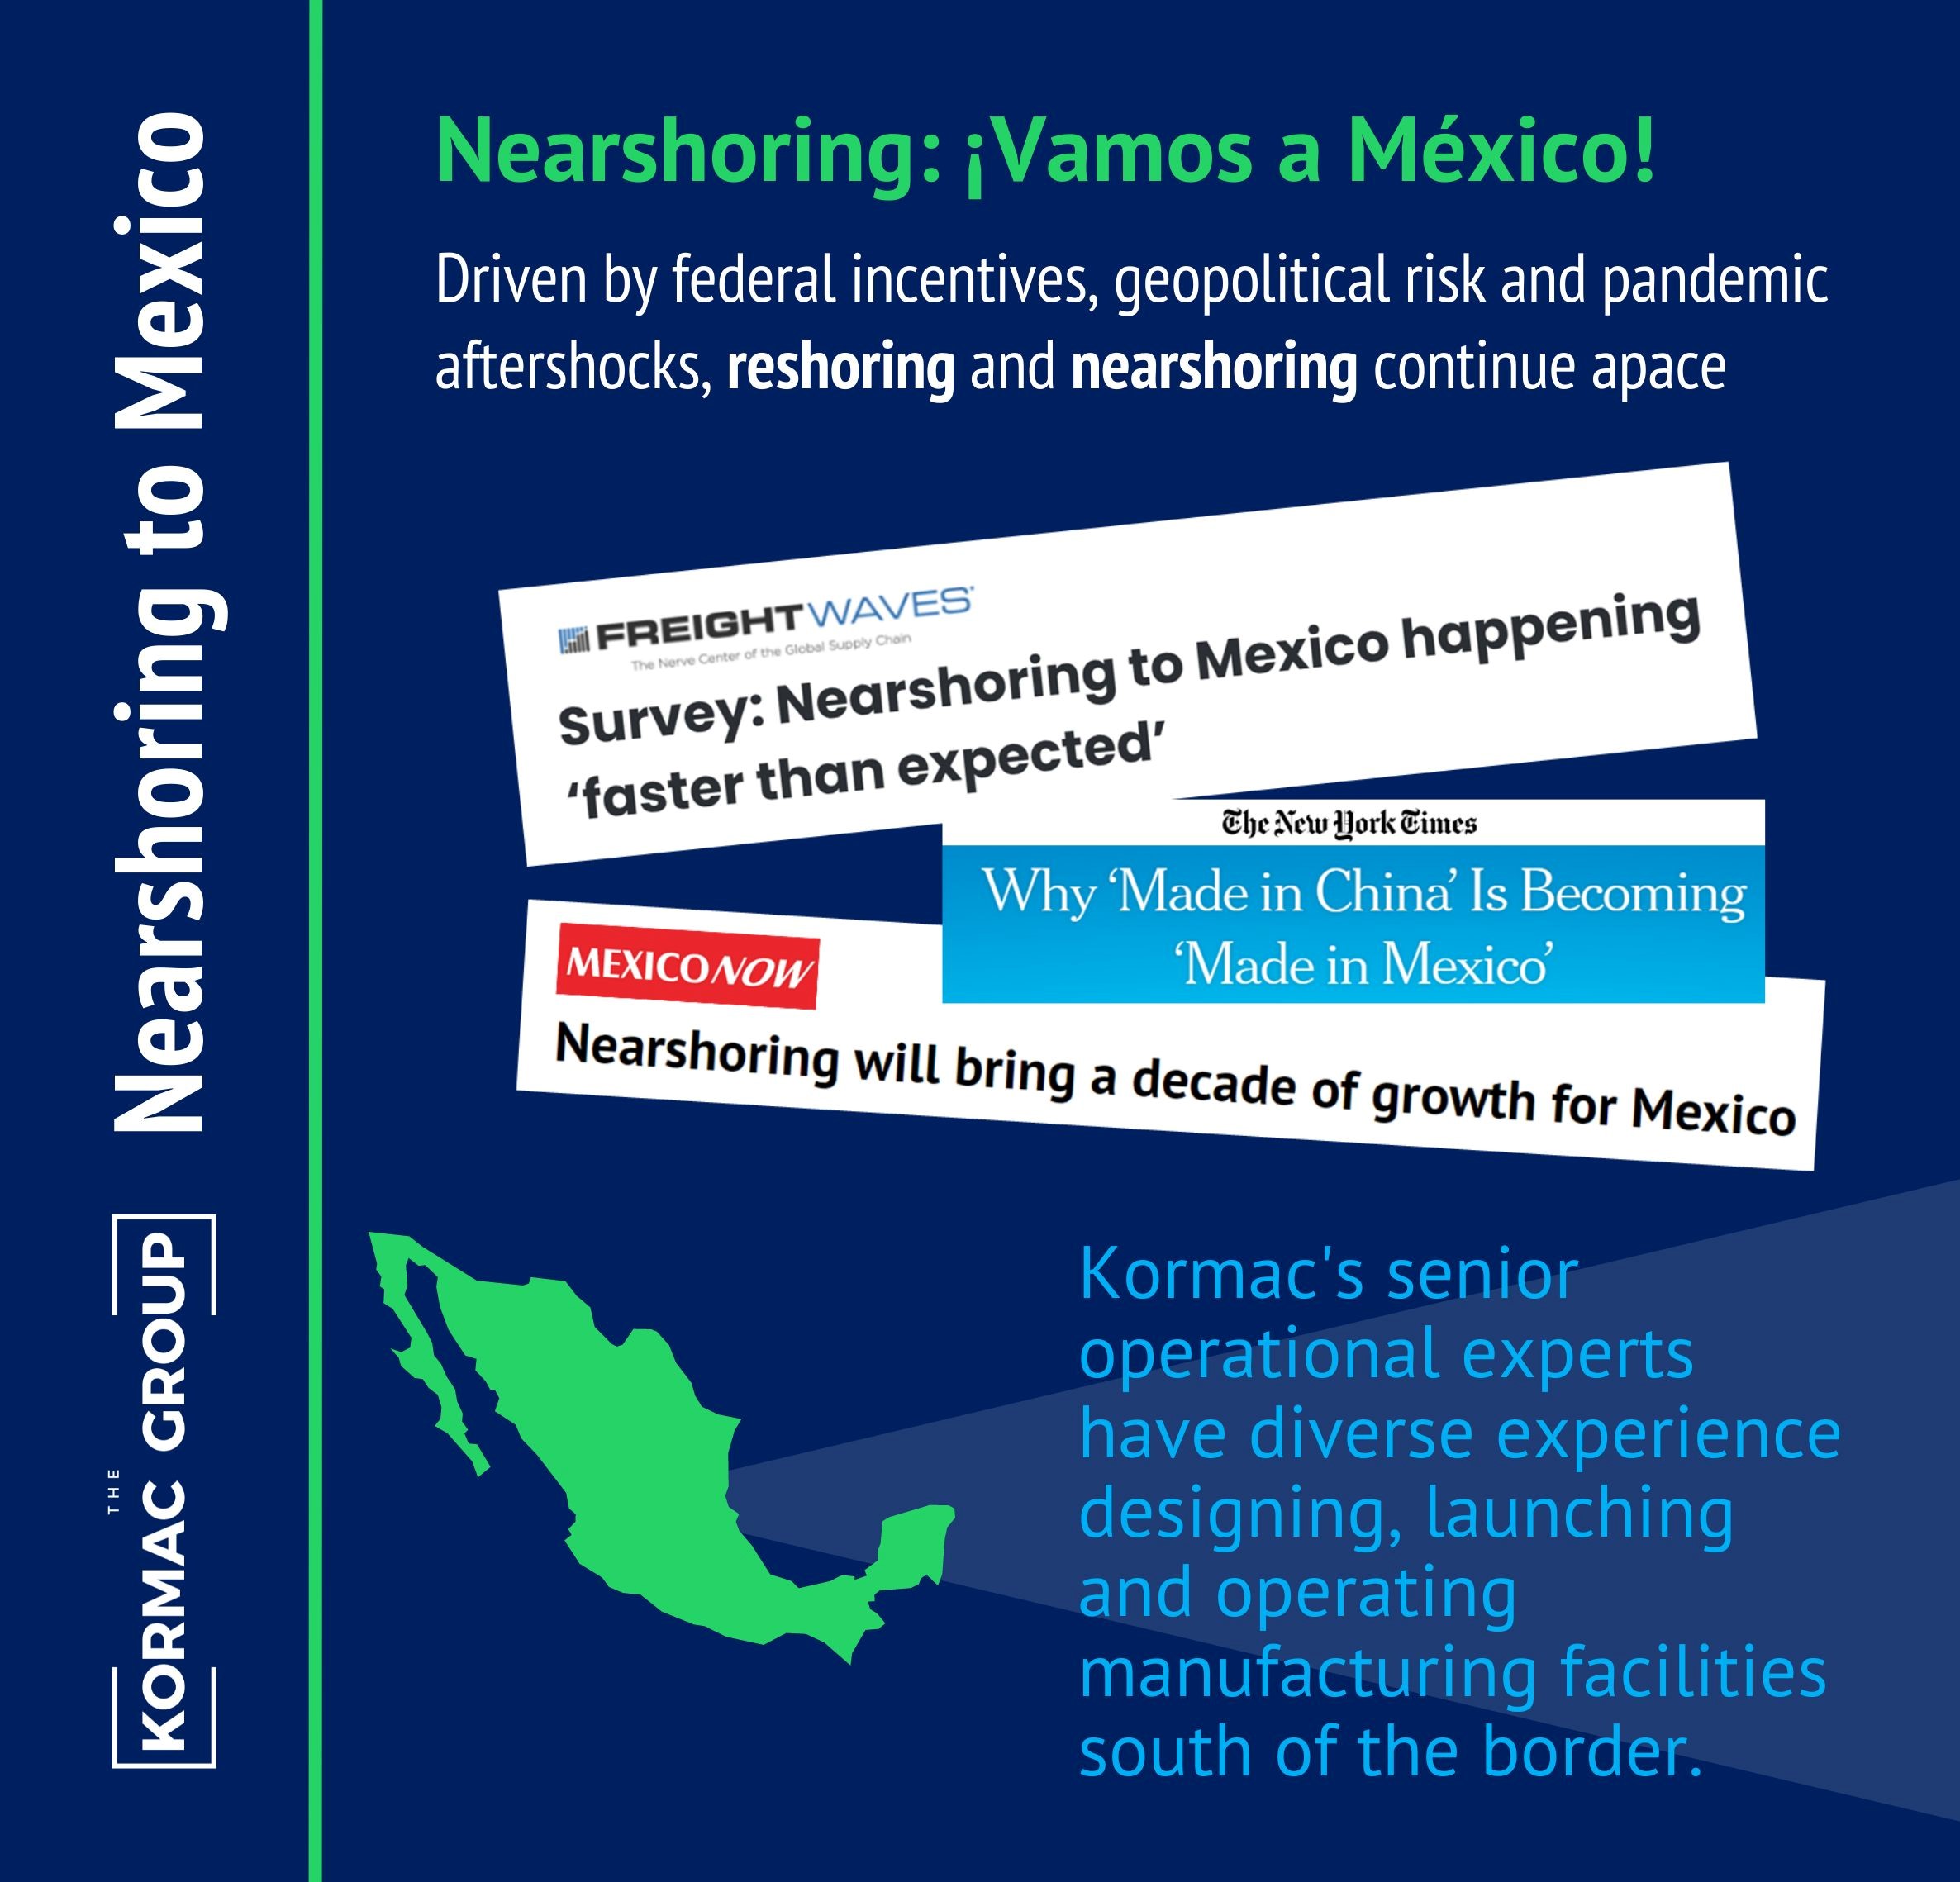 Nearshoring to Mexico Nearshoring: ¡Vamos a México! Driven by federal incentives, geopolitical risk, and pandemic aftershocks, restoring and nearshoring continue apace. [Screenshots of various article titles about restoring and México] Kormac's senior operational experts have diverse experience designing, launching, and operating manufacturing facilities south of the border